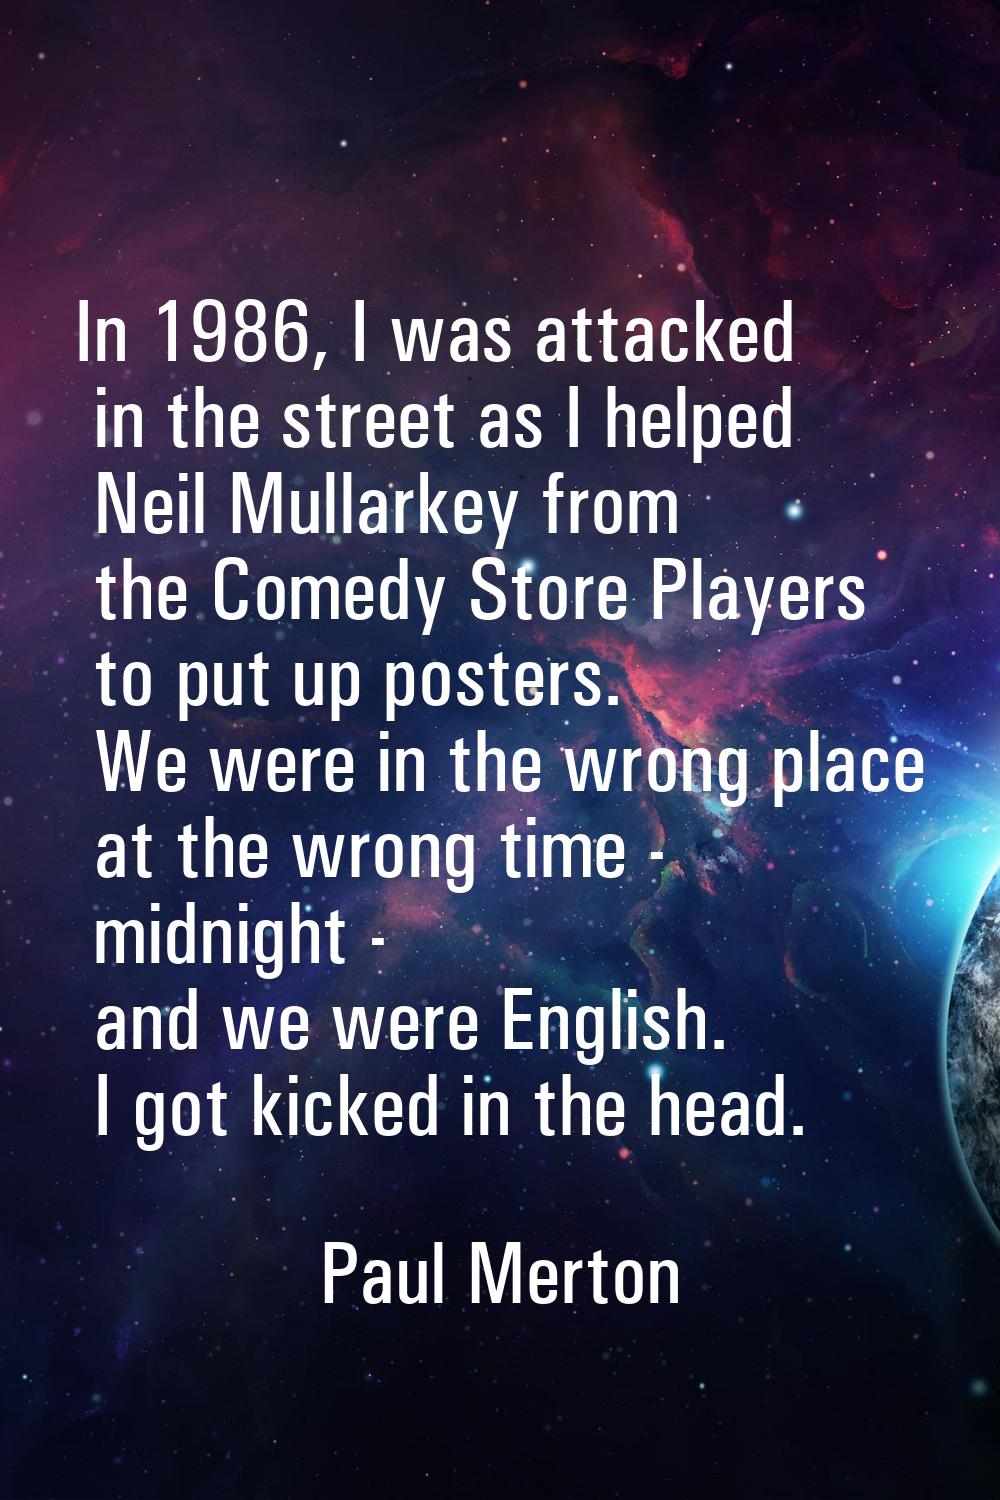 In 1986, I was attacked in the street as I helped Neil Mullarkey from the Comedy Store Players to p